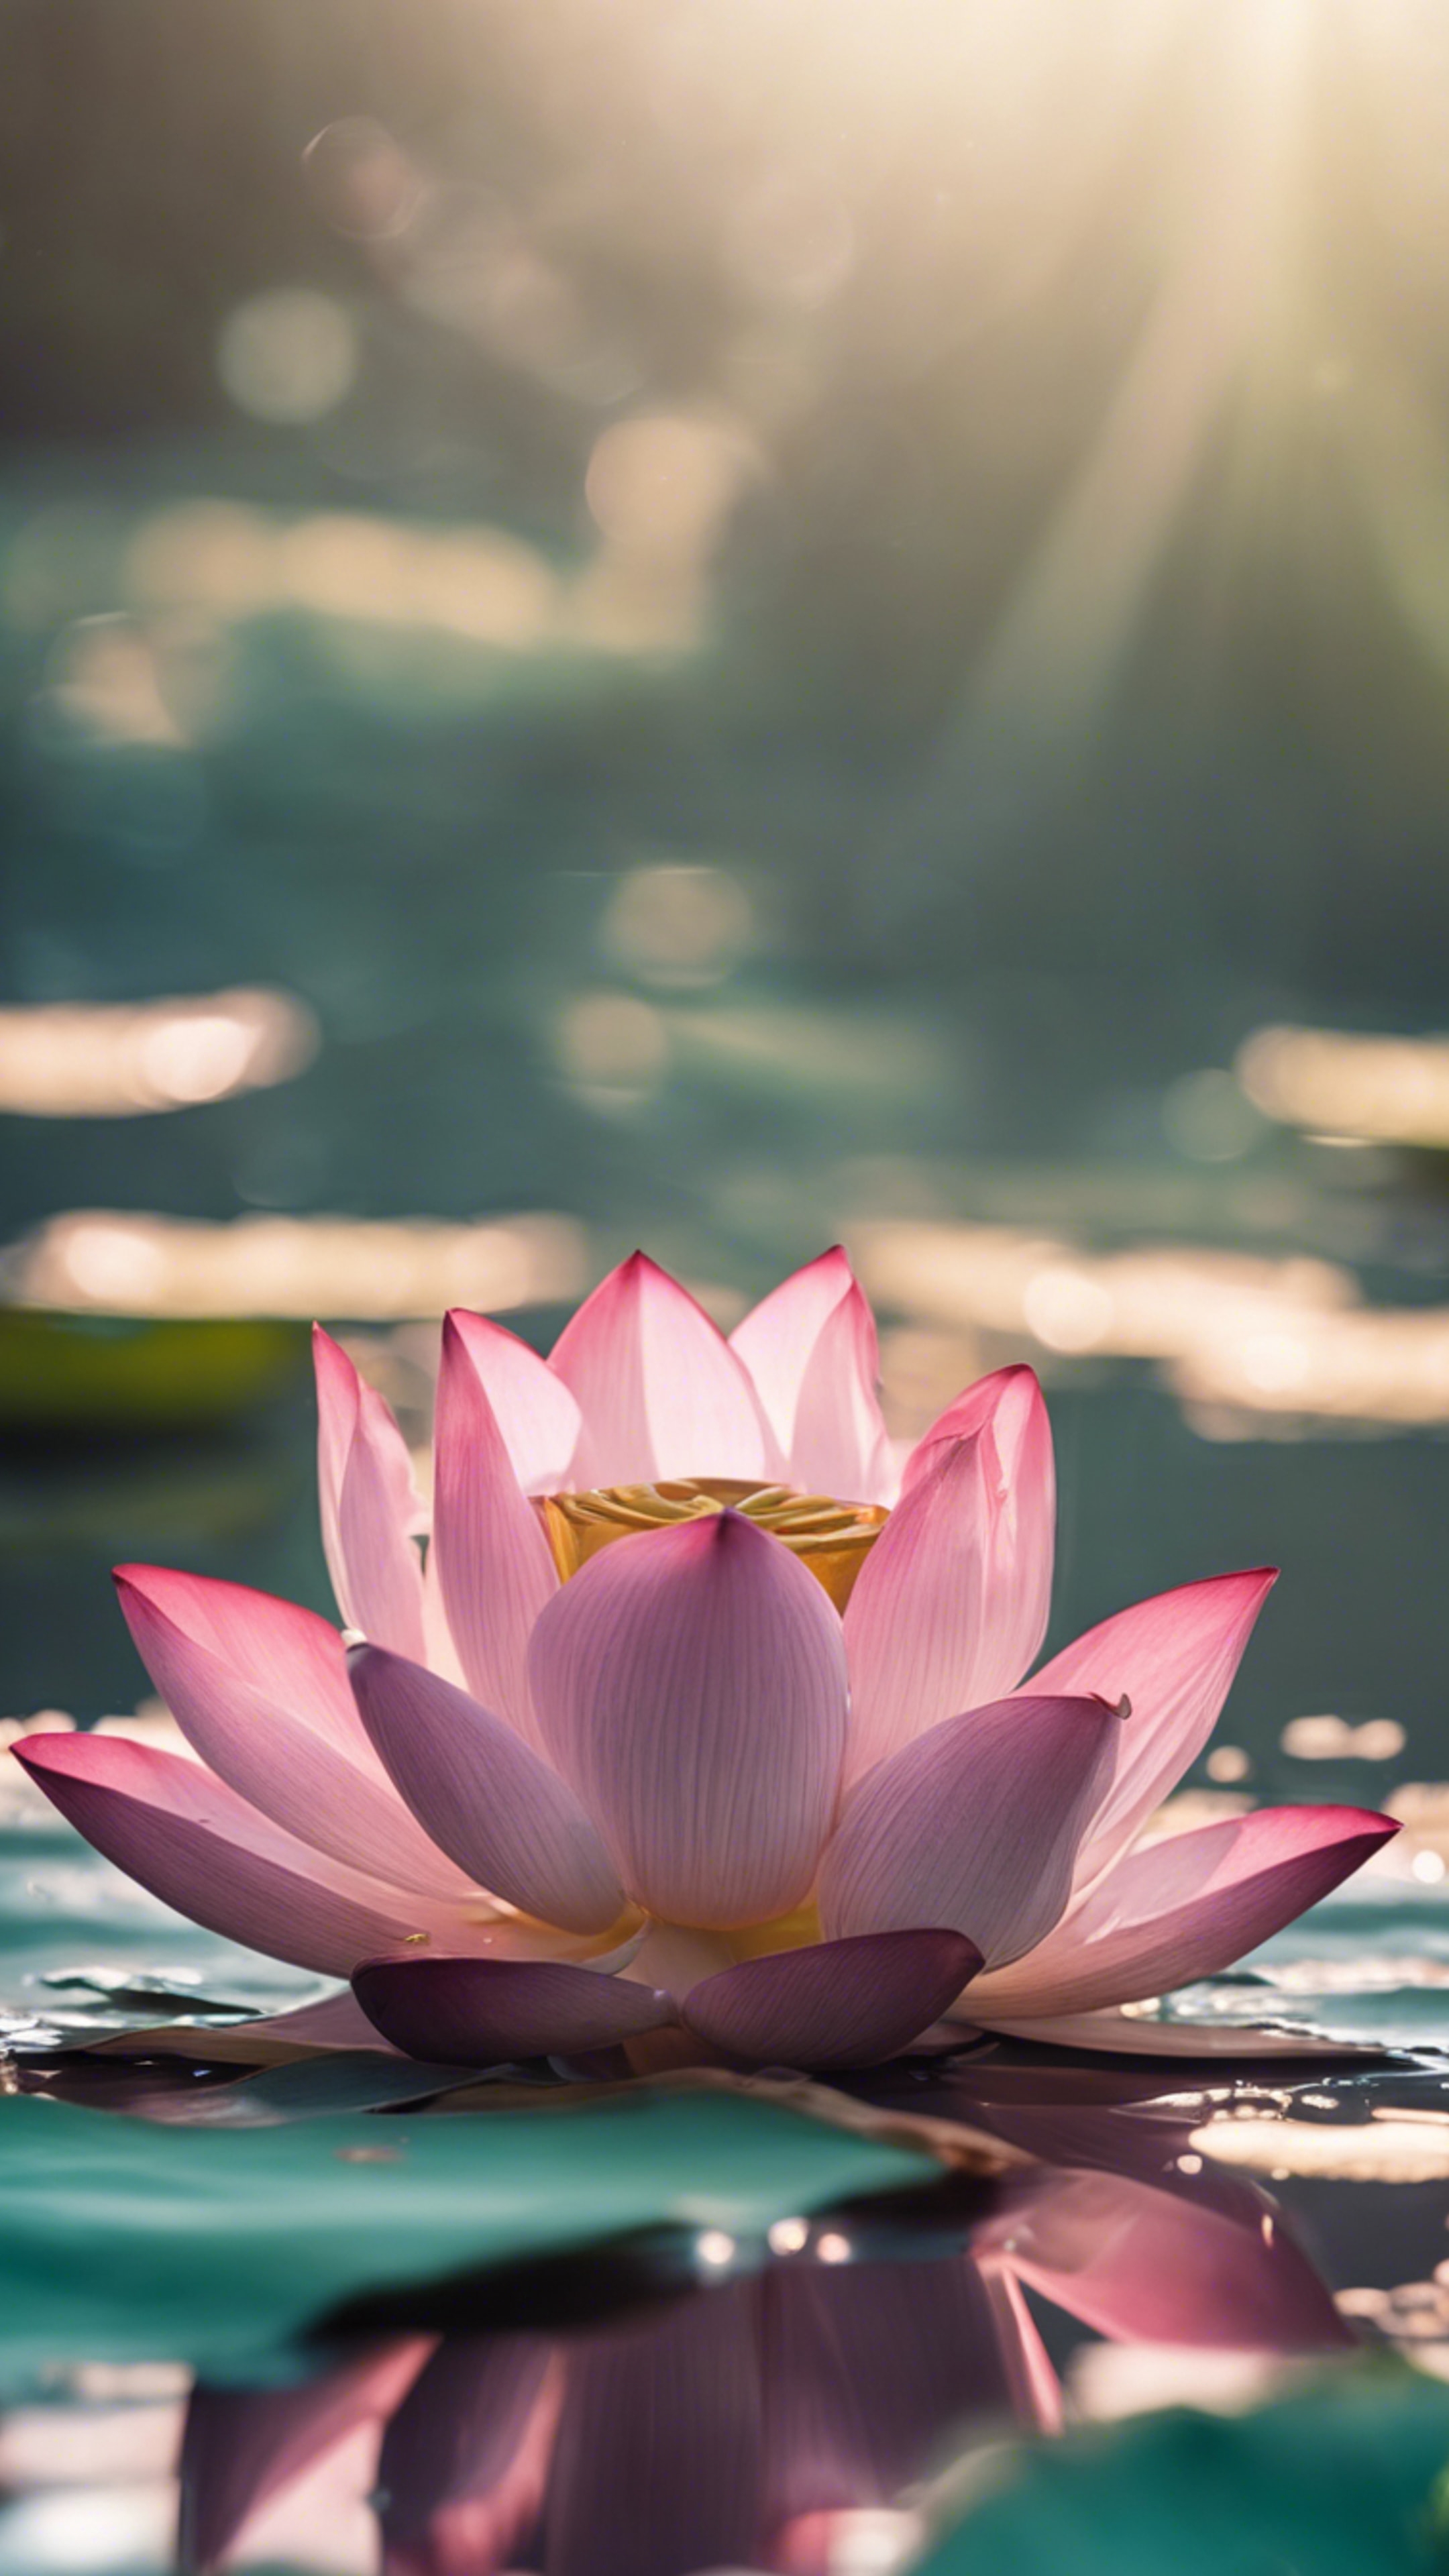 A close-up image of a single blooming lotus on a clear pond. Tapeta[056d411e4bd14d9f8d69]